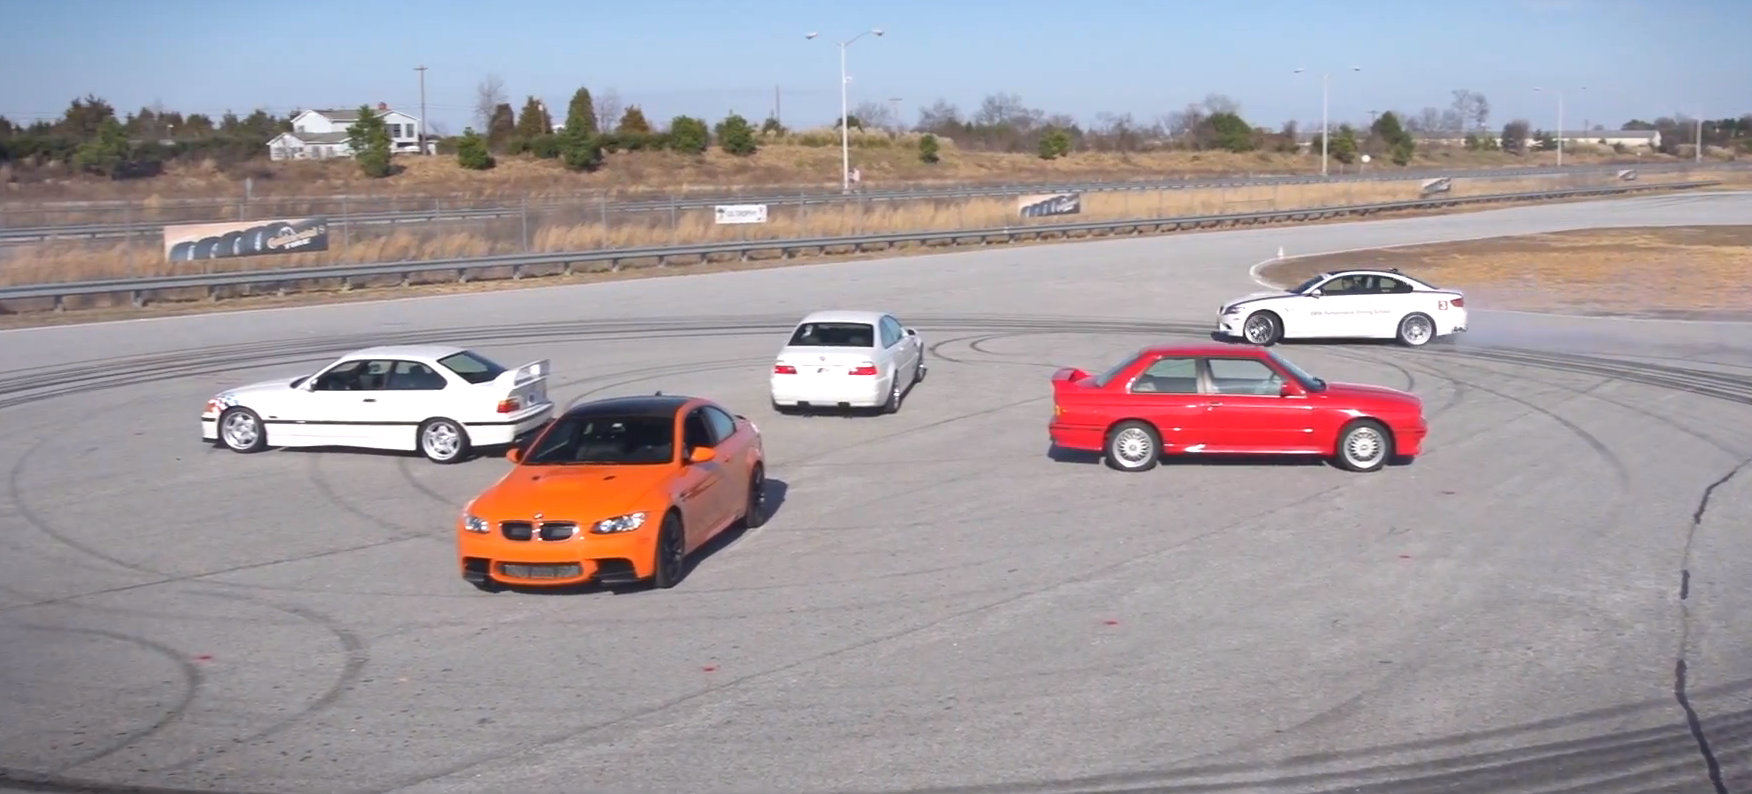 bmw-m3-28-years-of-evolution-video-59387